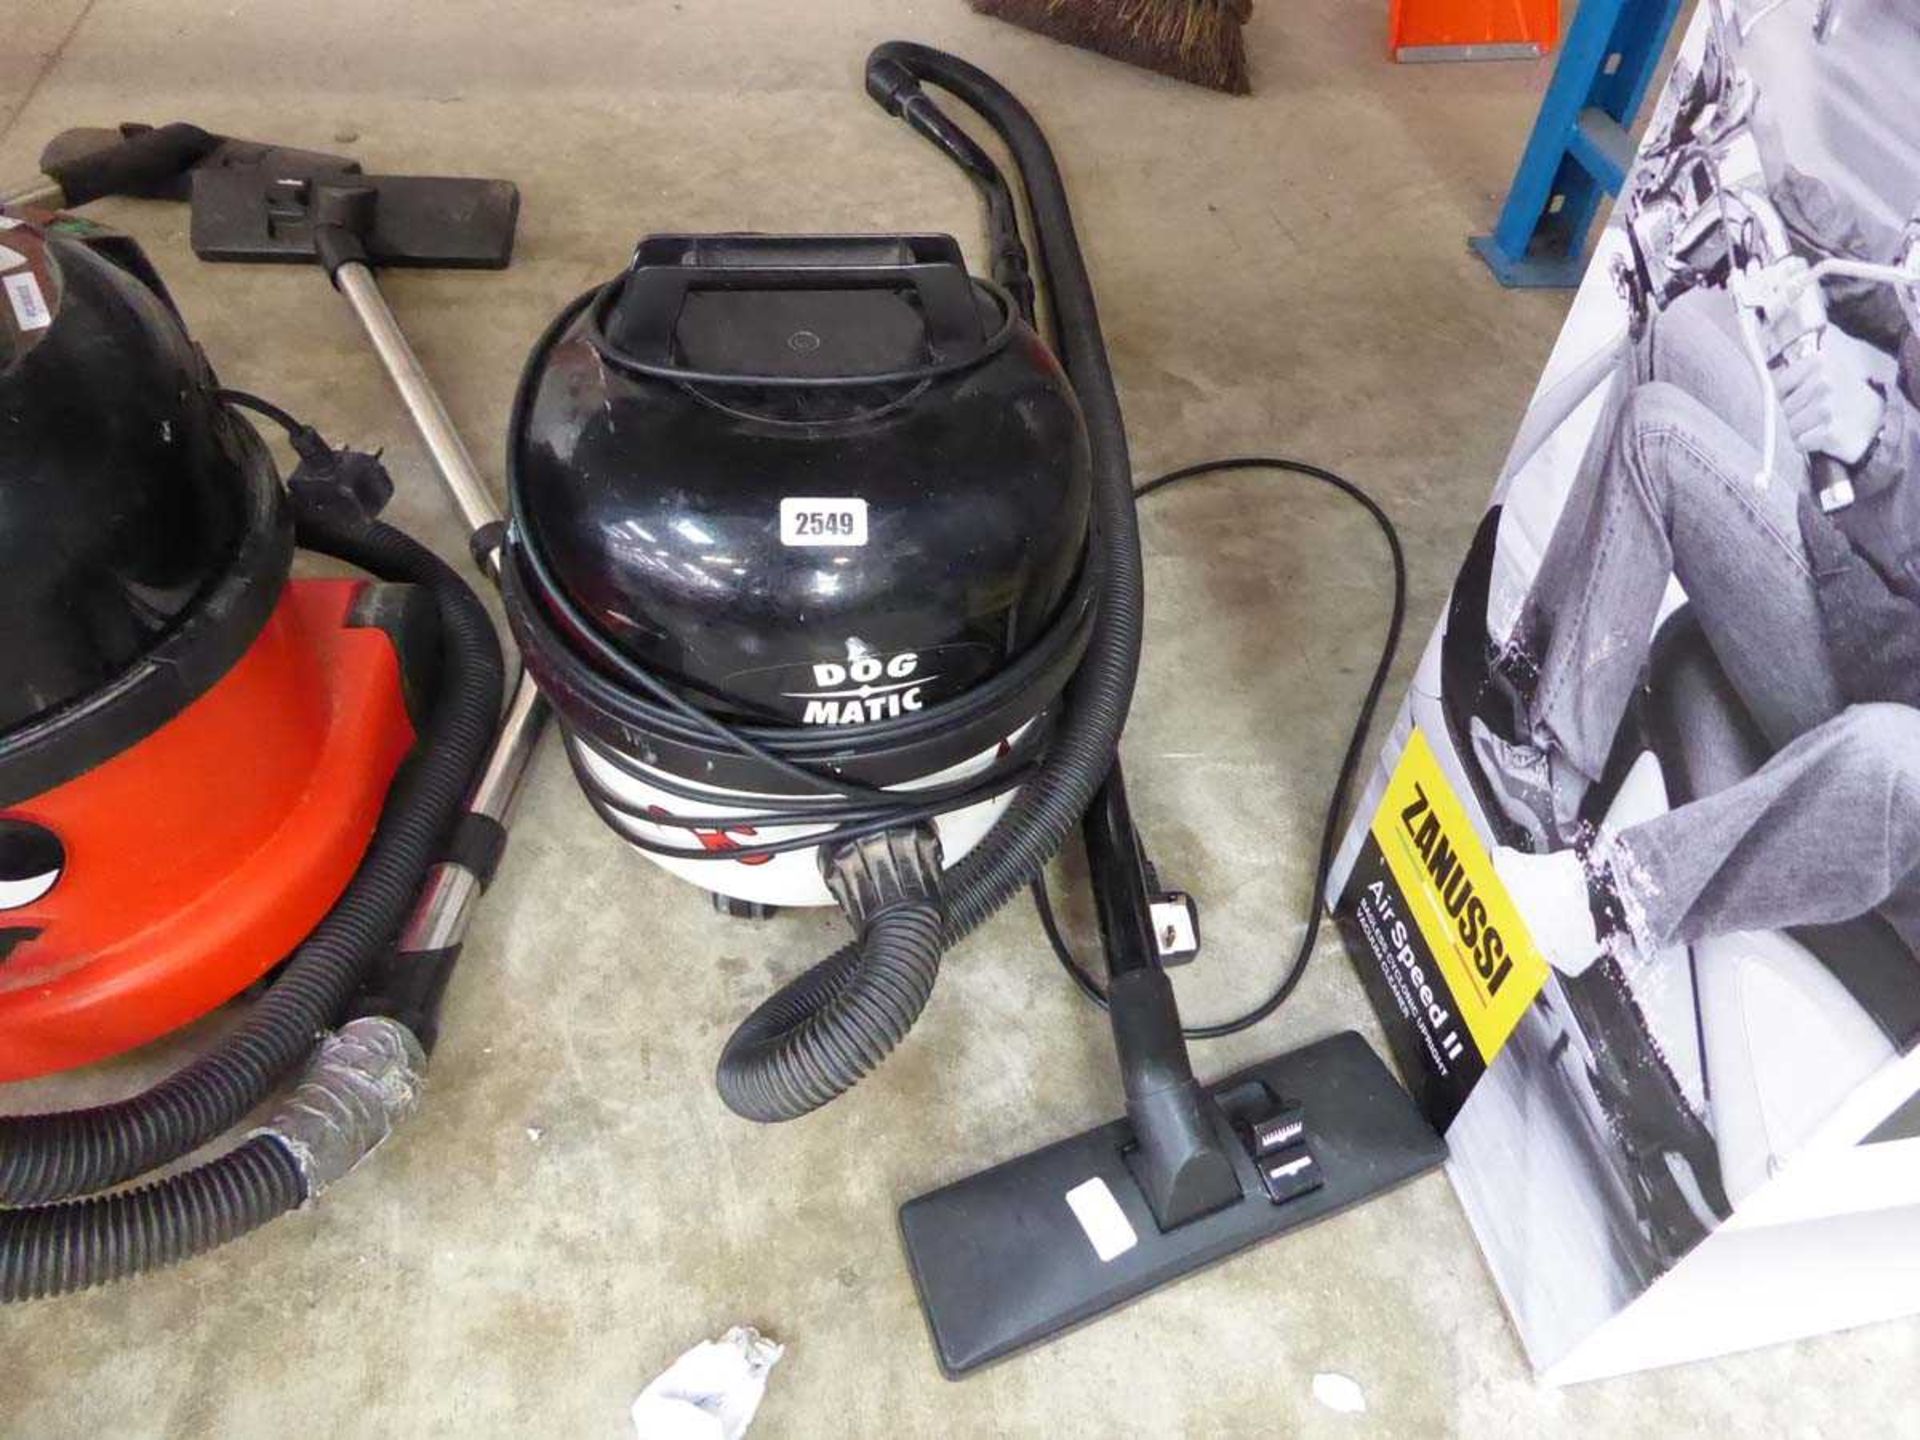 Dog Matic vacuum cleaner with hose and pole